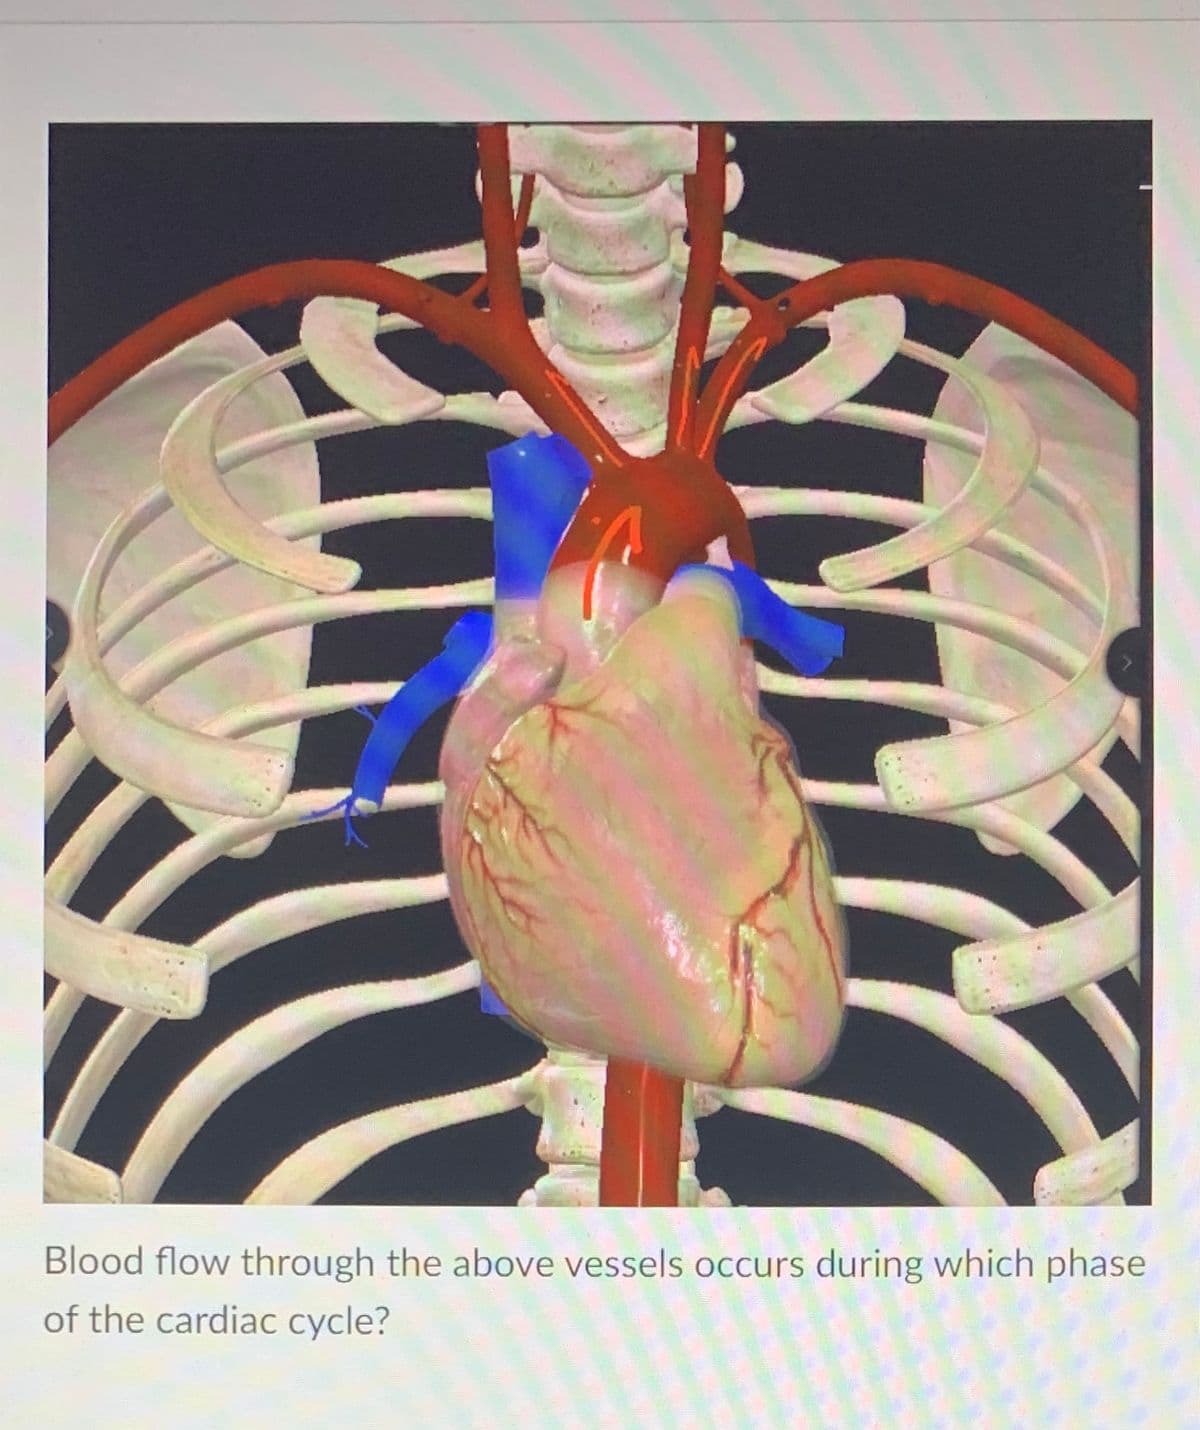 Blood flow through the above vessels occurs during which phase
of the cardiac cycle?
